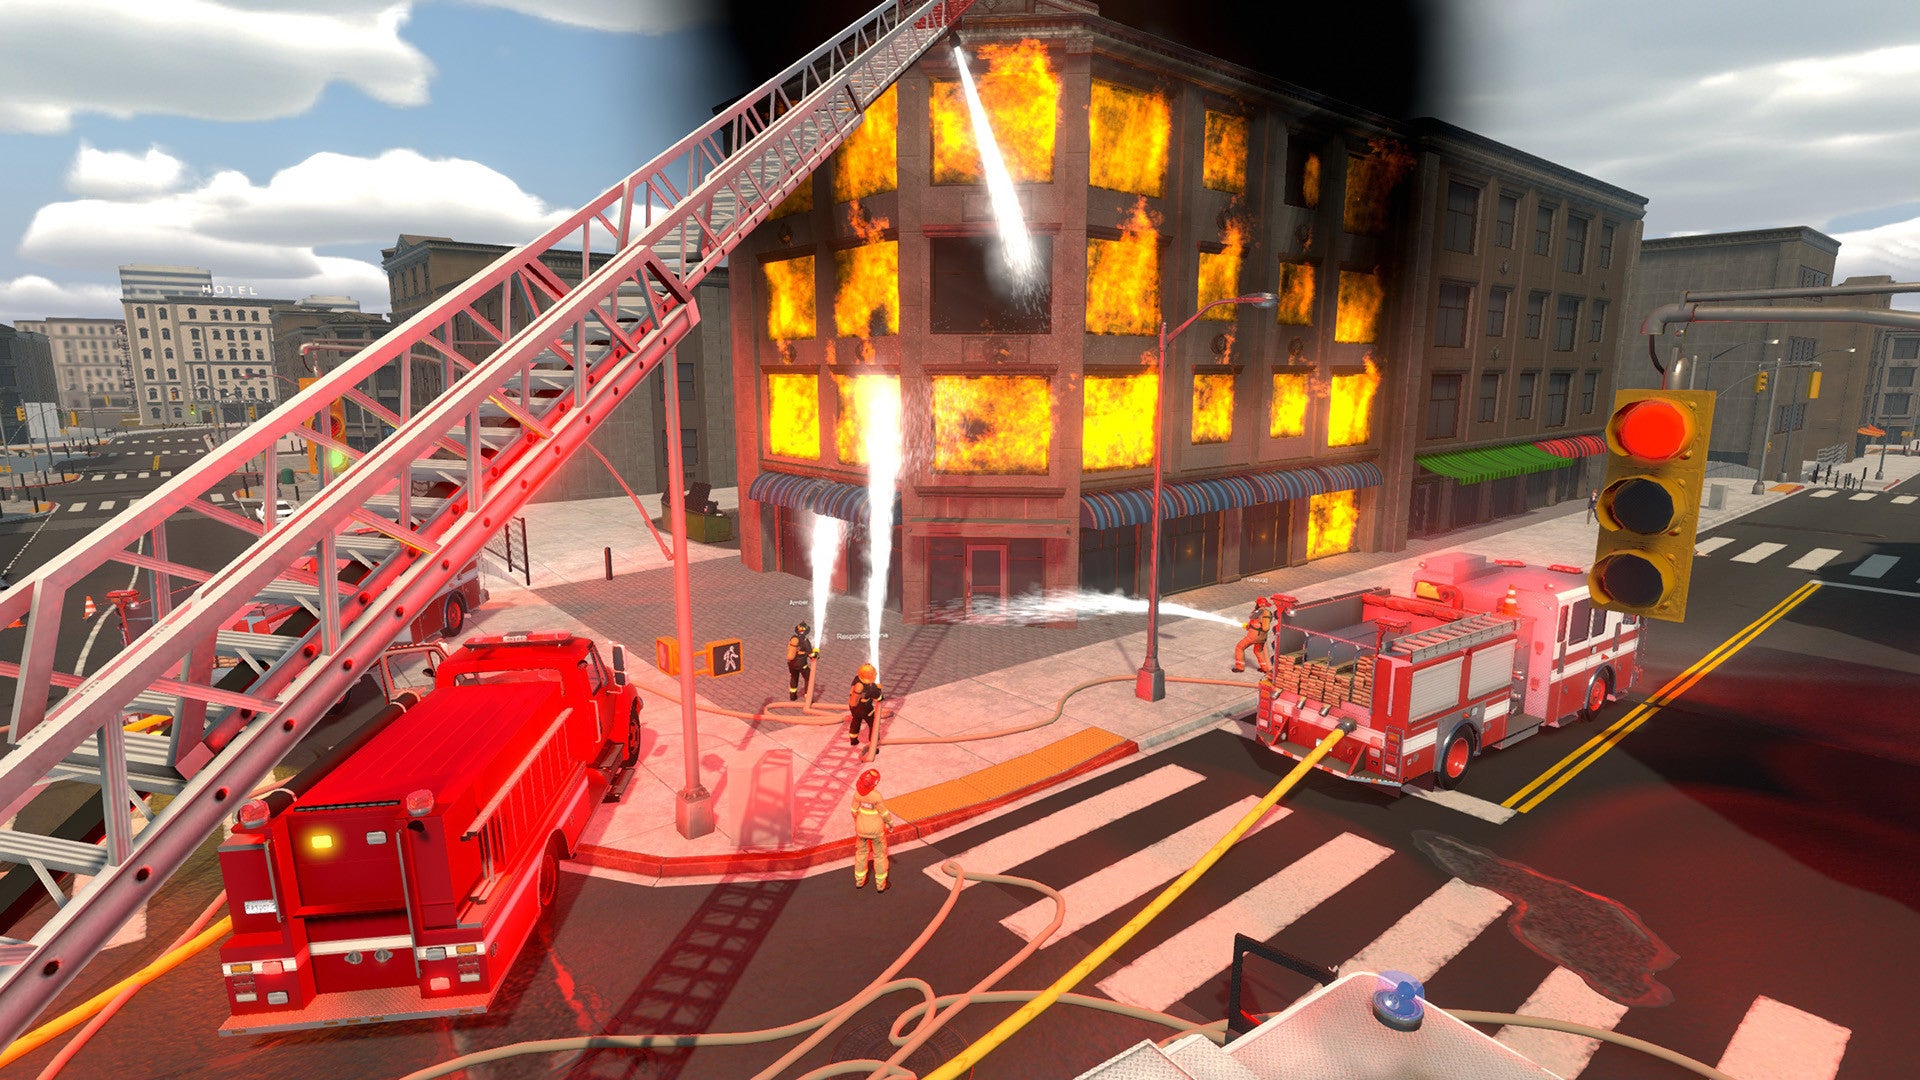 Roblox for  Fire 7 (2017) - free download APK file for Fire